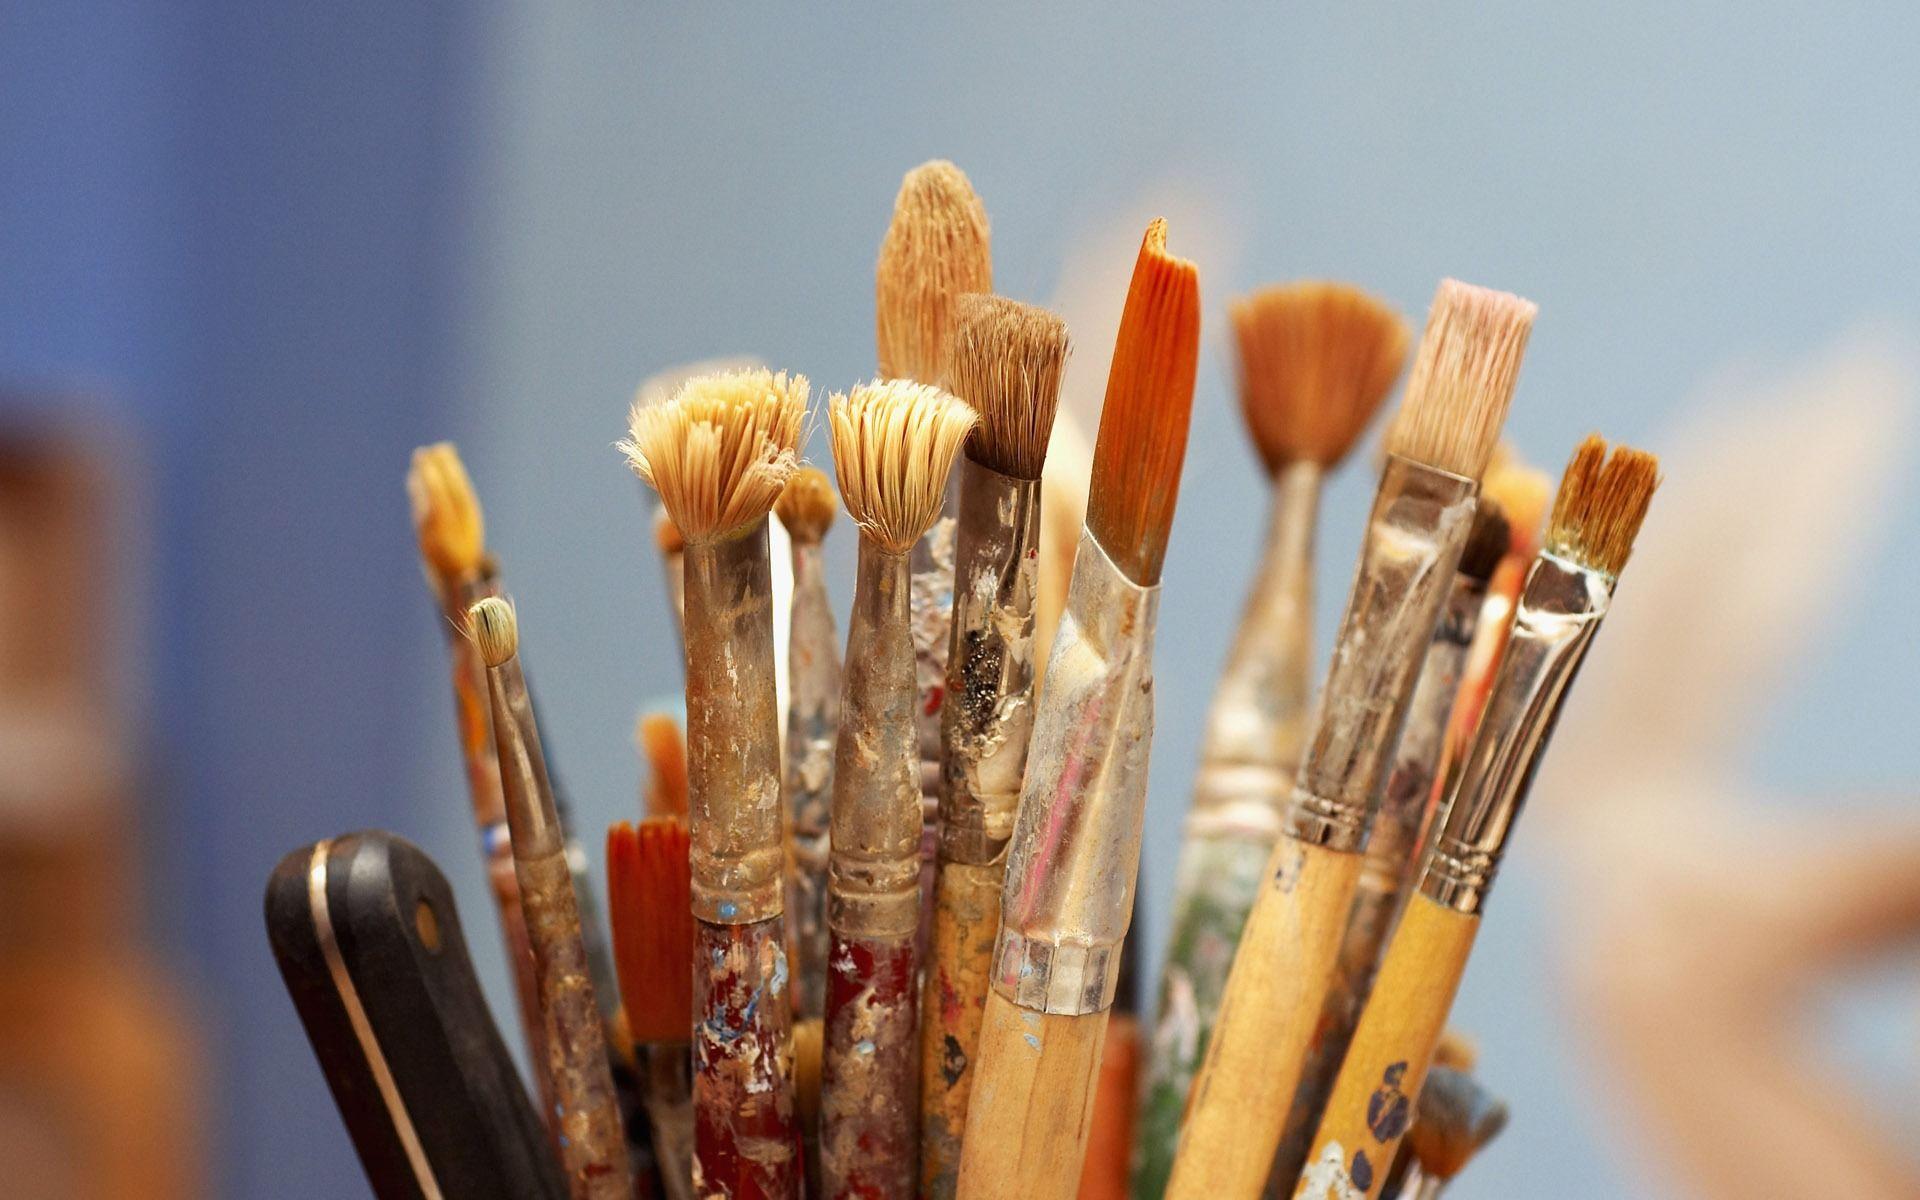 Paint Brushes Wallpaper. Makeup Brushes Wallpaper, Makeup Brushes Background and Paint Brushes Background Awesome